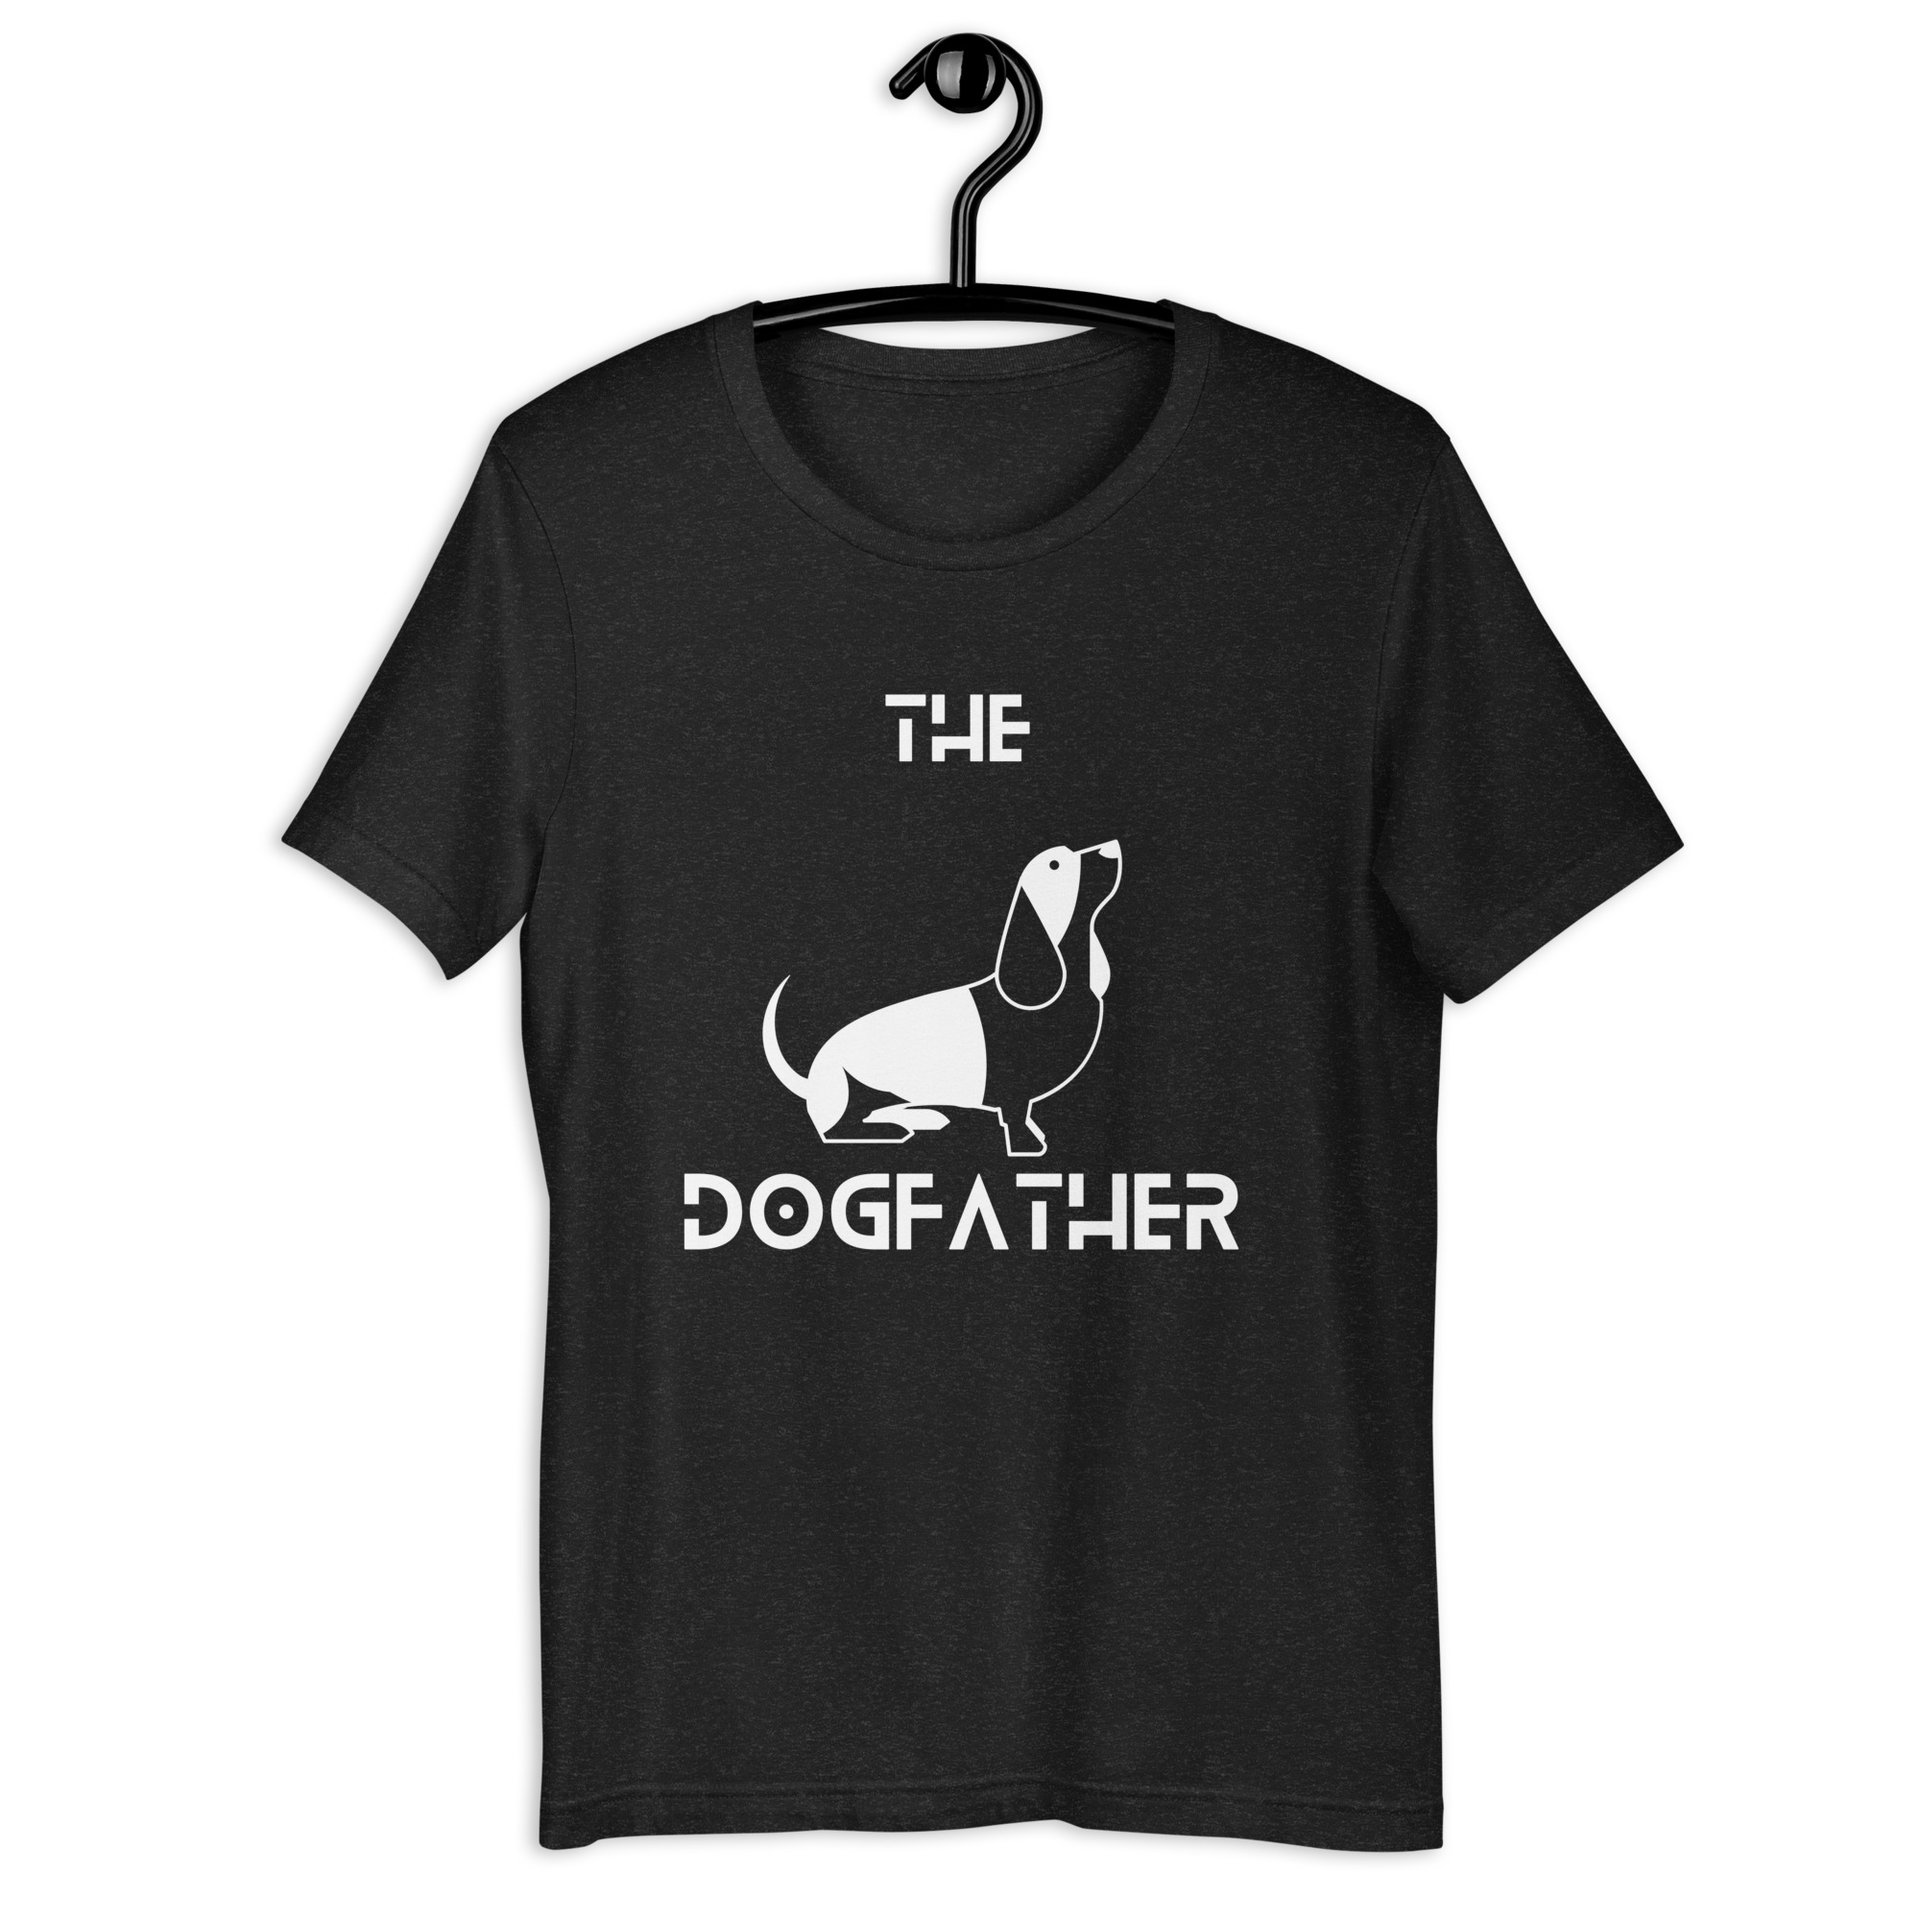 The Dogfather Hounds Unisex T-Shirt. Black Heather